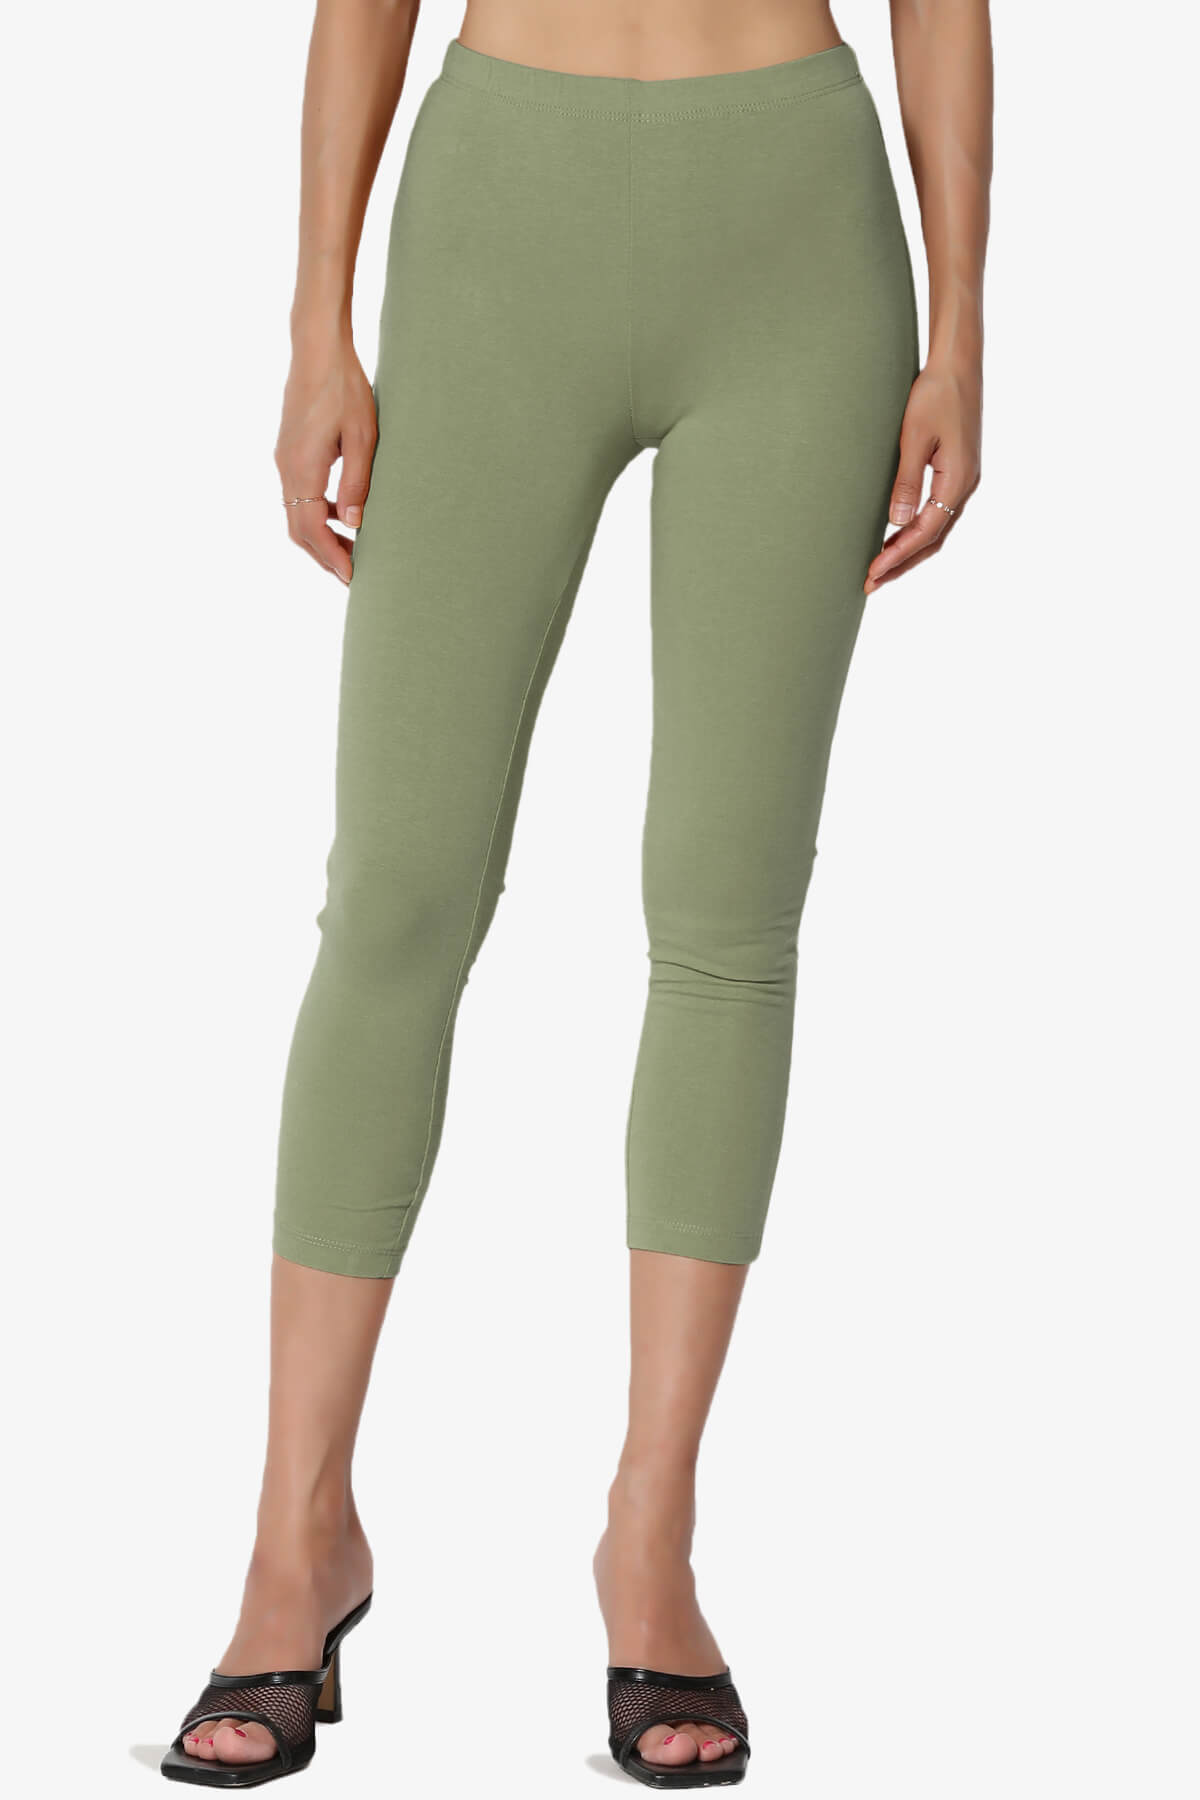 Load image into Gallery viewer, Ansley Luxe Cotton Capri Leggings DUSTY OLIVE_1
